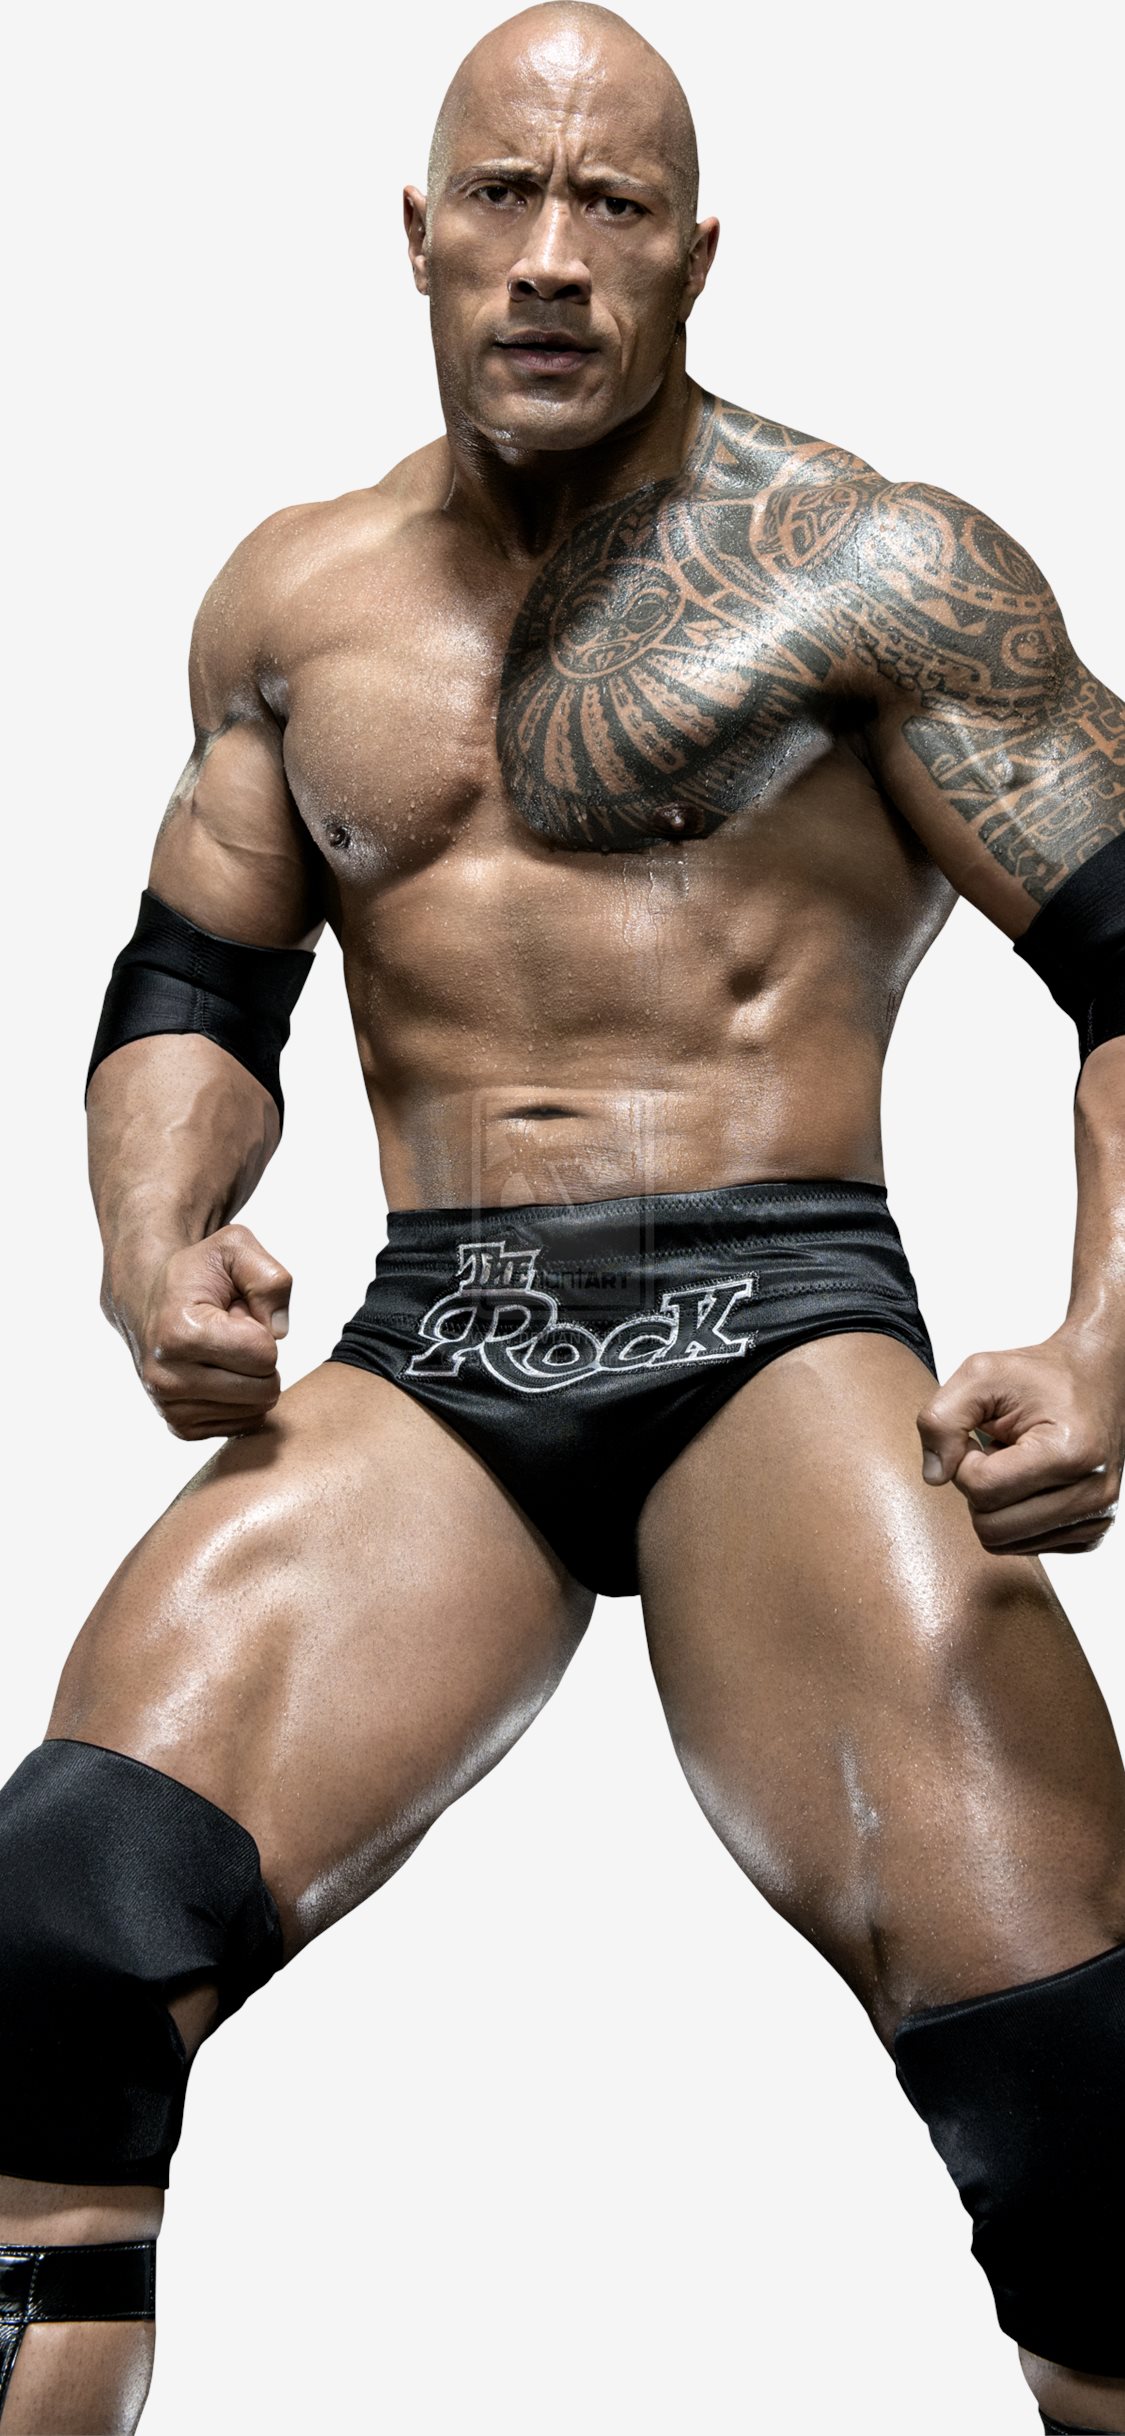 Backstage Update on Possible WrestleMania 37 Plans for Randy Orton